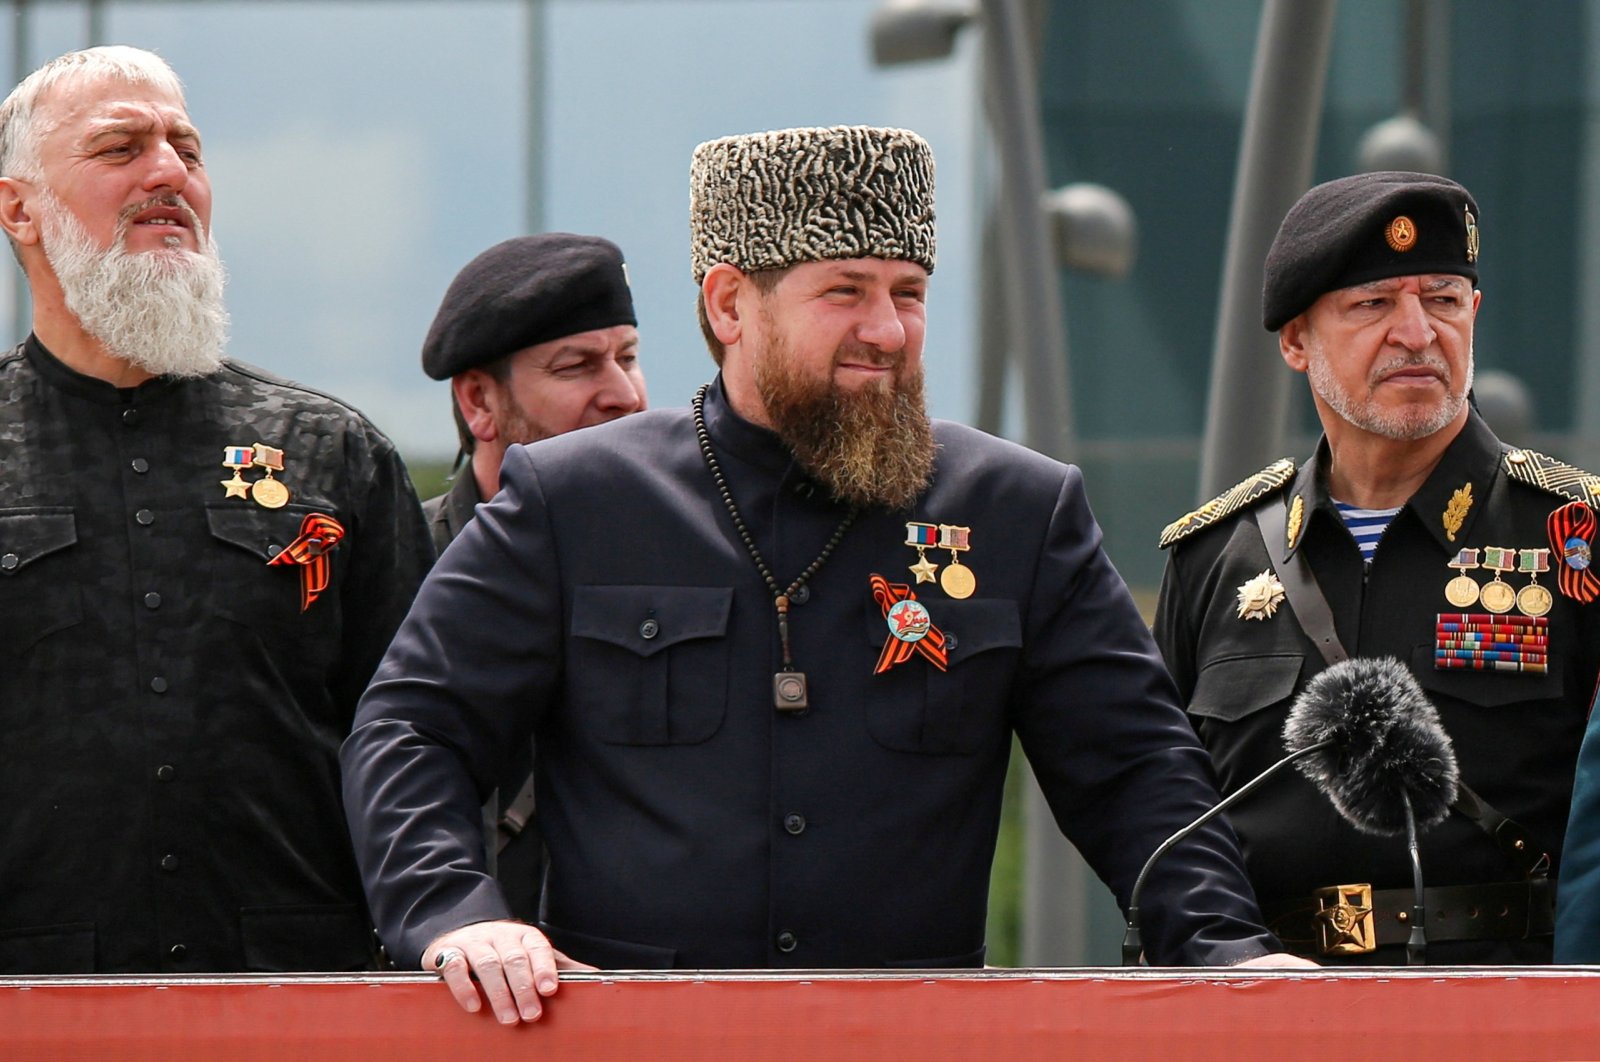 Head of the Chechen Republic Ramzan Kadyrov (С), Interior Minister Ruslan Alkhanov (R) and Russia&#039;s State Duma member Adam Delimkhanov attend a military parade on Victory Day, which marks the 77th anniversary of the victory over Nazi Germany in World War II, Grozny, Russia, May 9, 2022. (Reuters Photo)